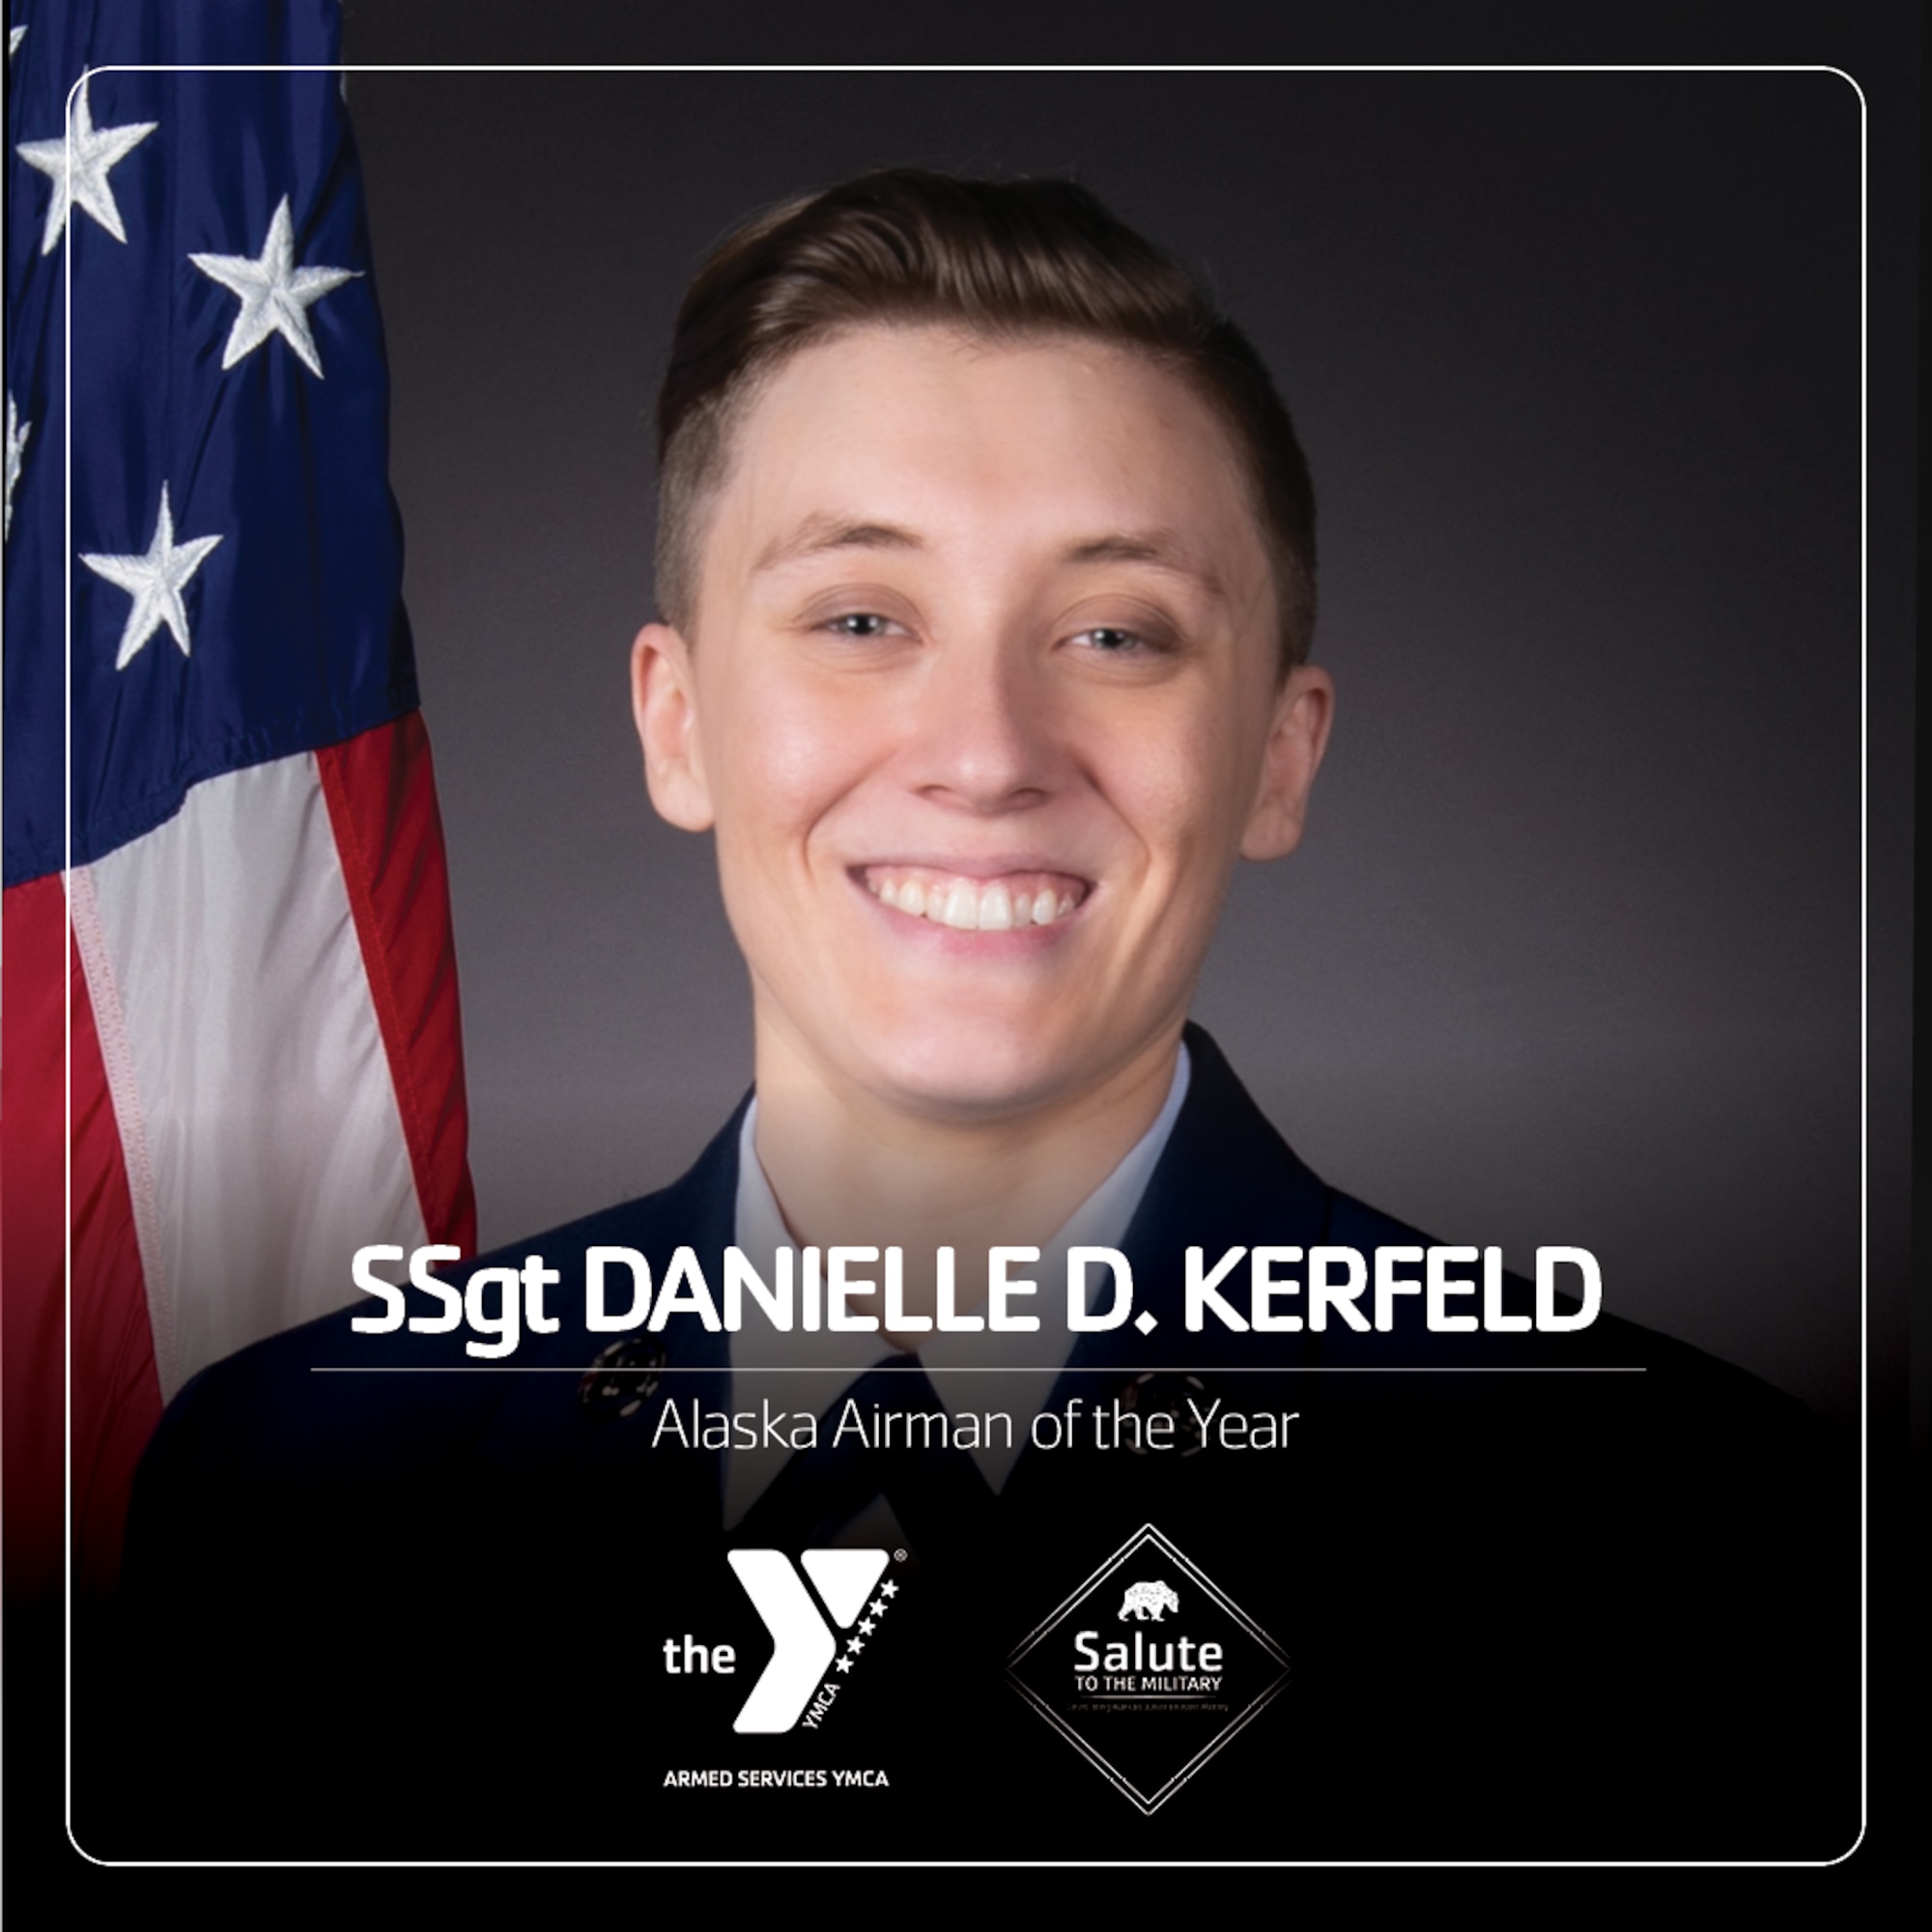 Air Force Staff Sgt. Danielle Kerfeld was recognized as the Alaska Airman of the Year.